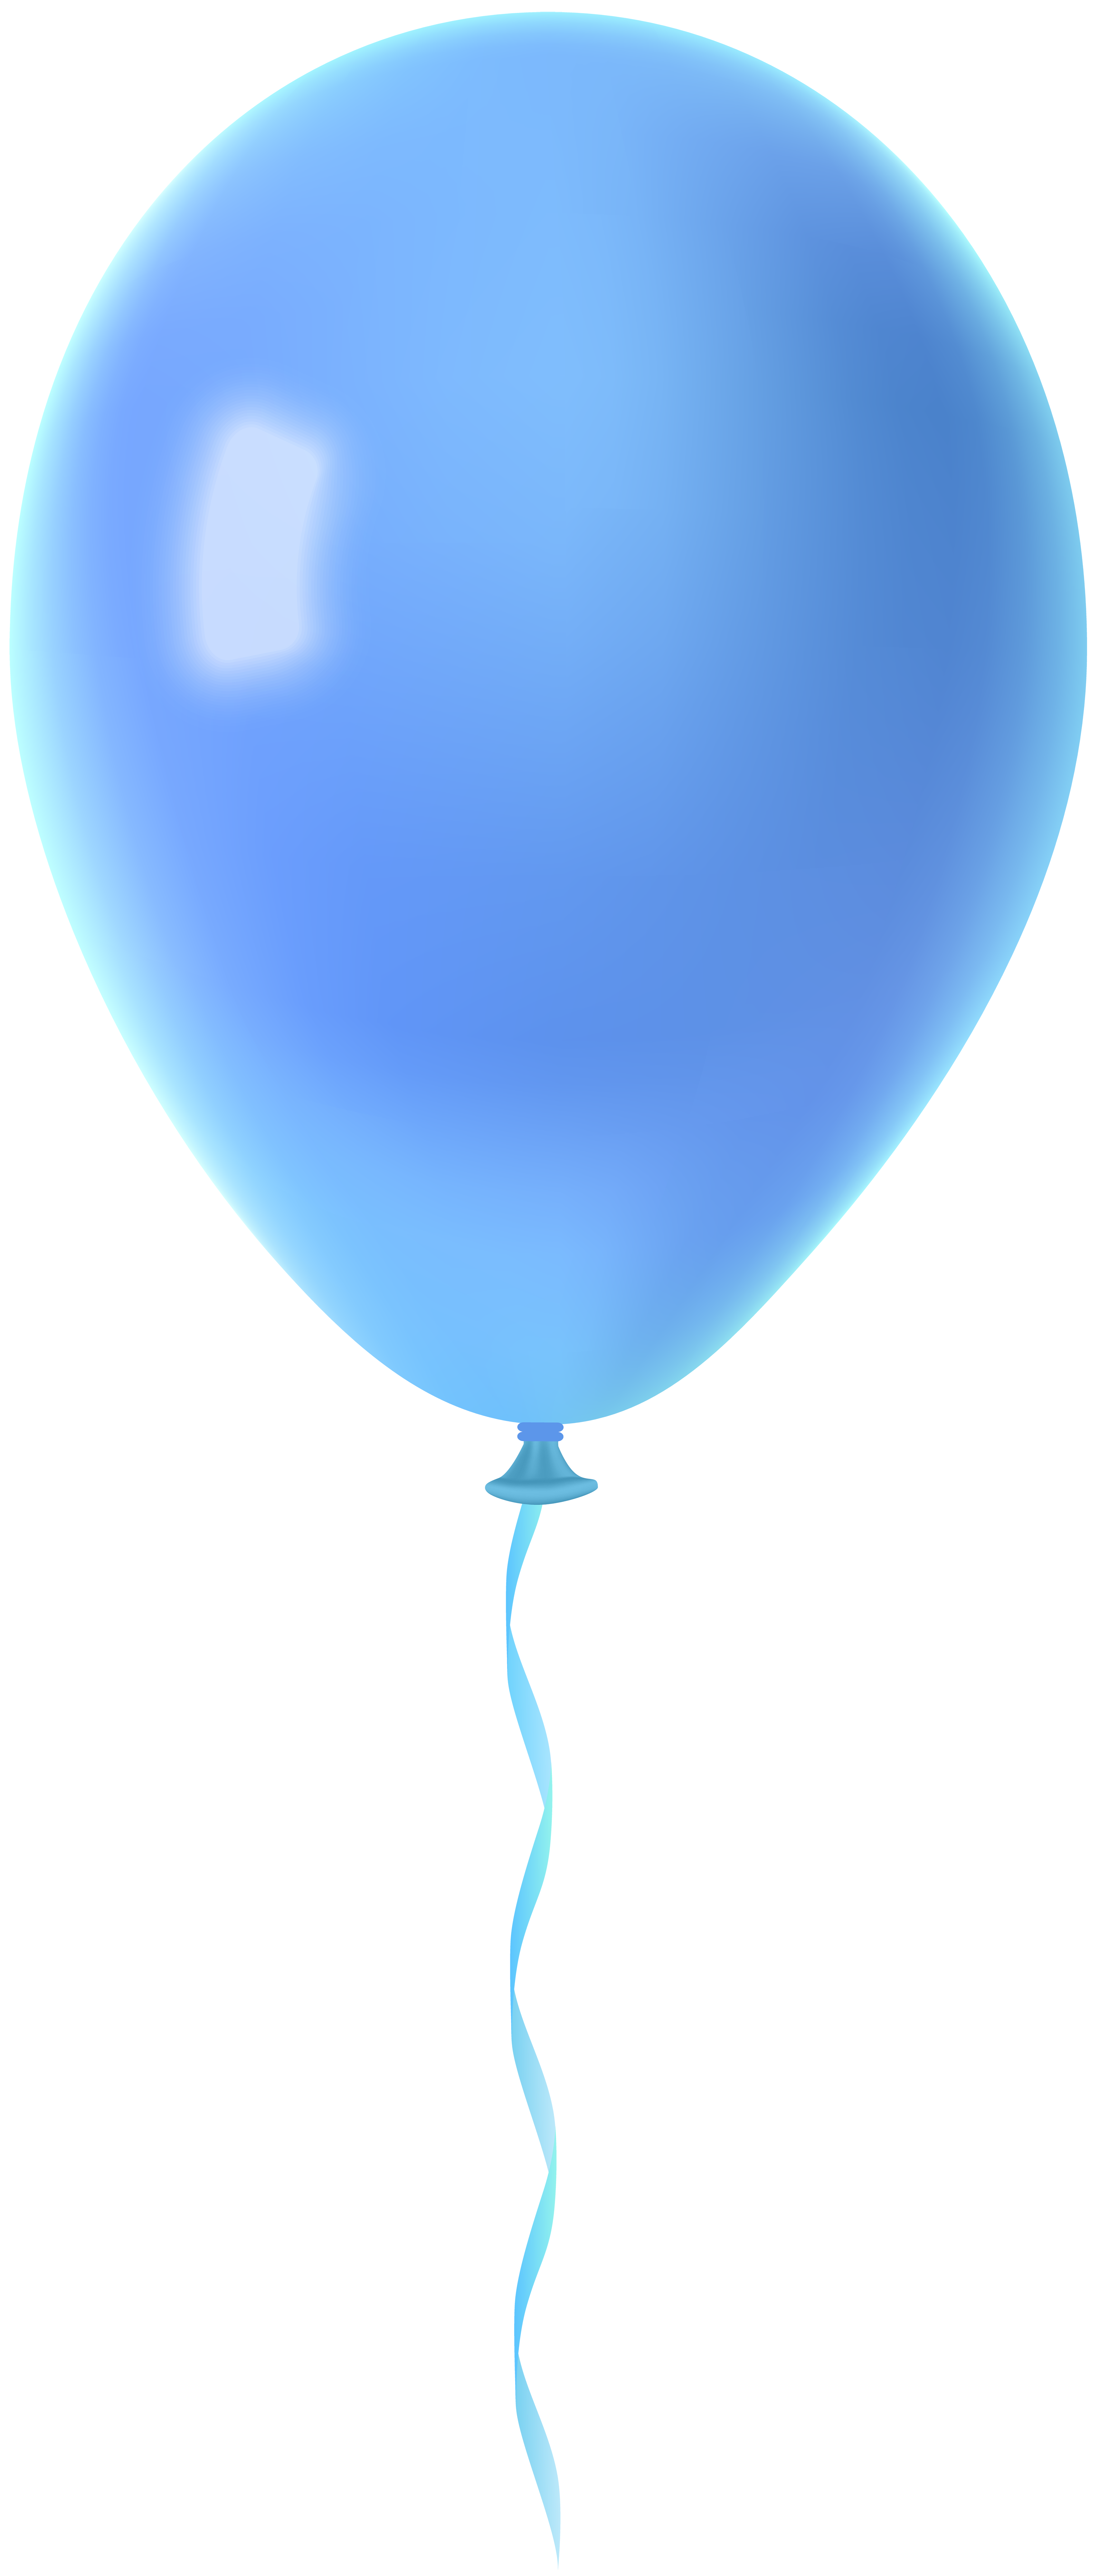 blue balloon transparent png clip art image gallery yopriceville high quality images and transparent png free clipart gallery yopriceville